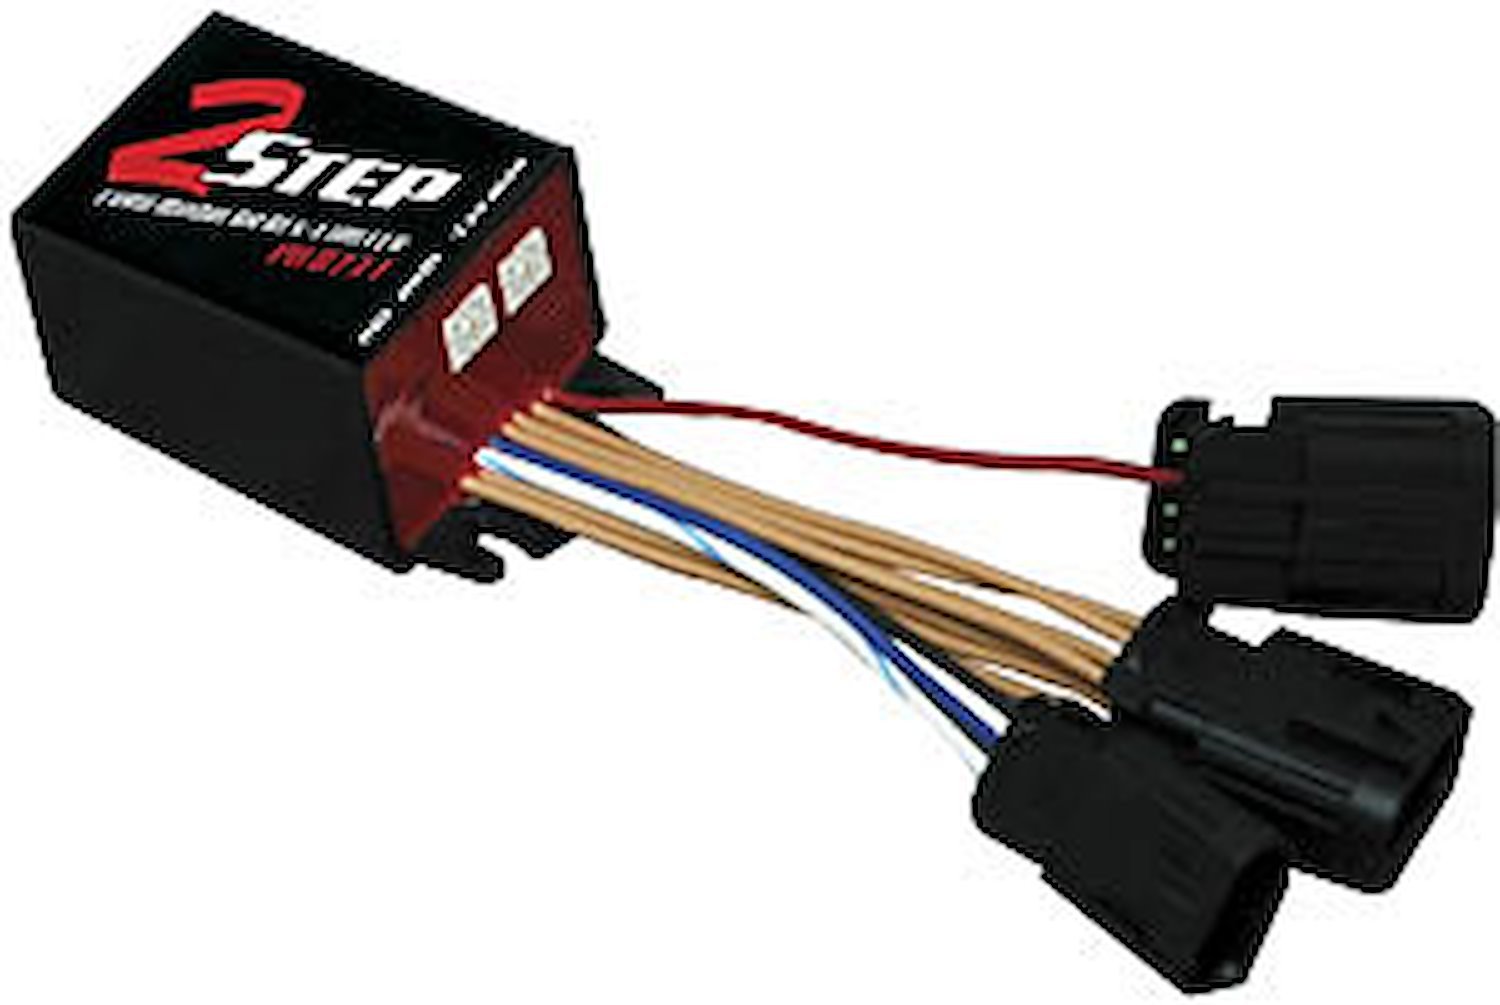 2-Step Launch Master RPM Controller 2011-2013 Ford 5.0L Mod Motor